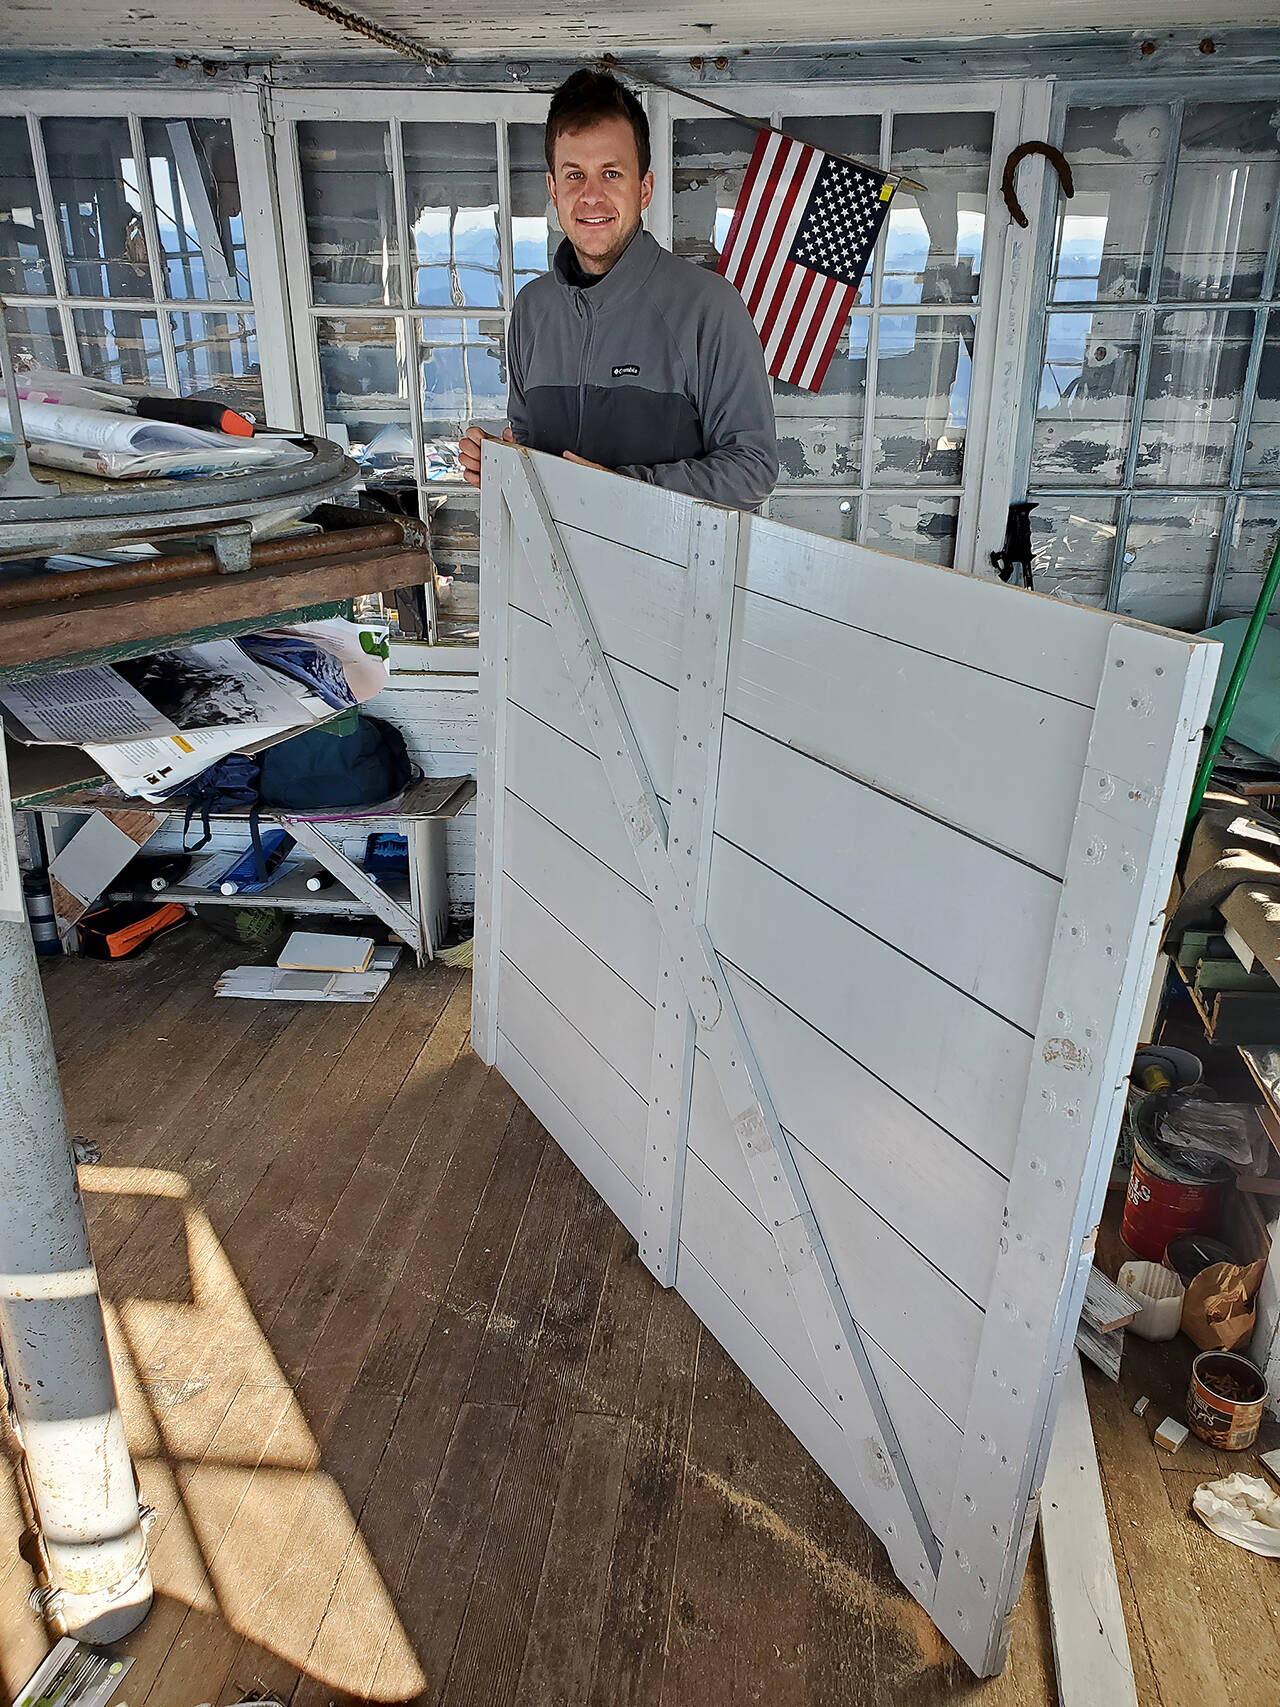 Zach Schrempp readies a new shutter to be installed at Three Fingers Lookout. (Friends of Three Fingers Lookout)